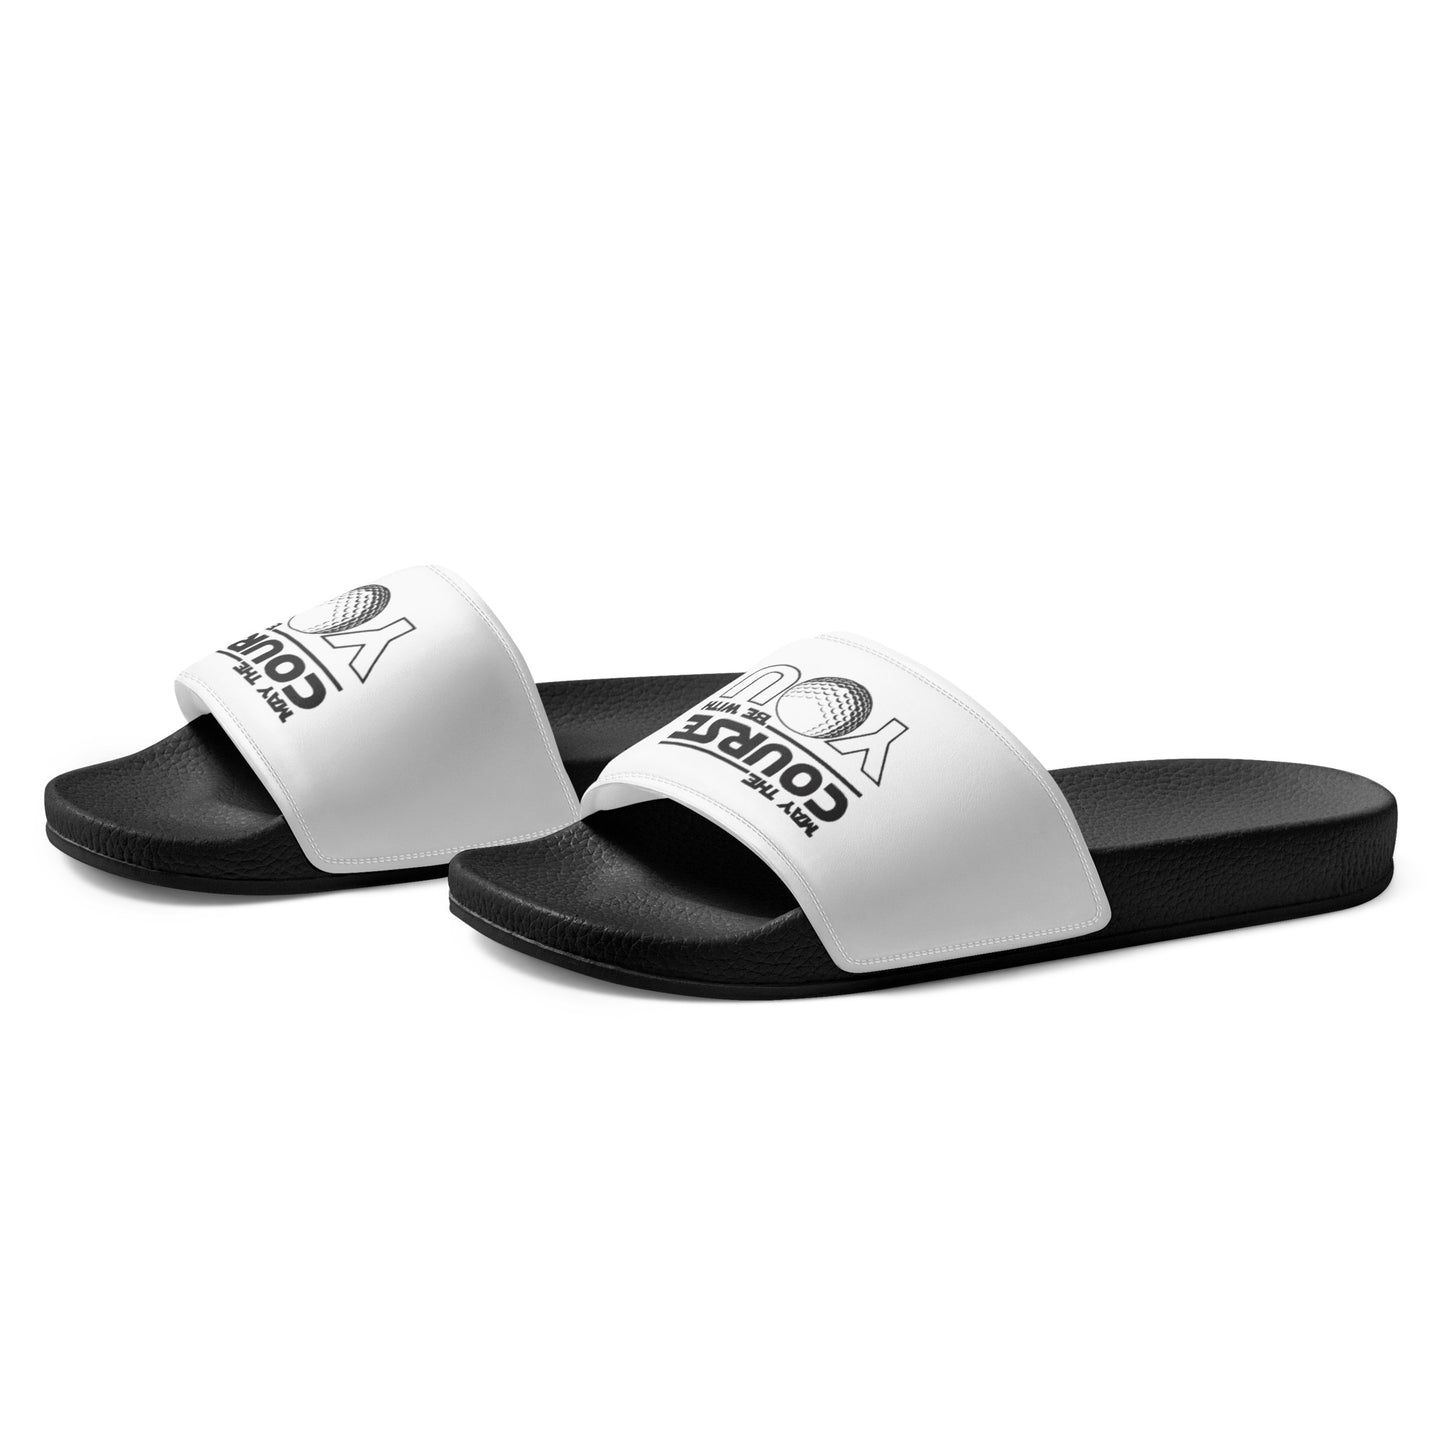 May The Course Be With You Men's Slides